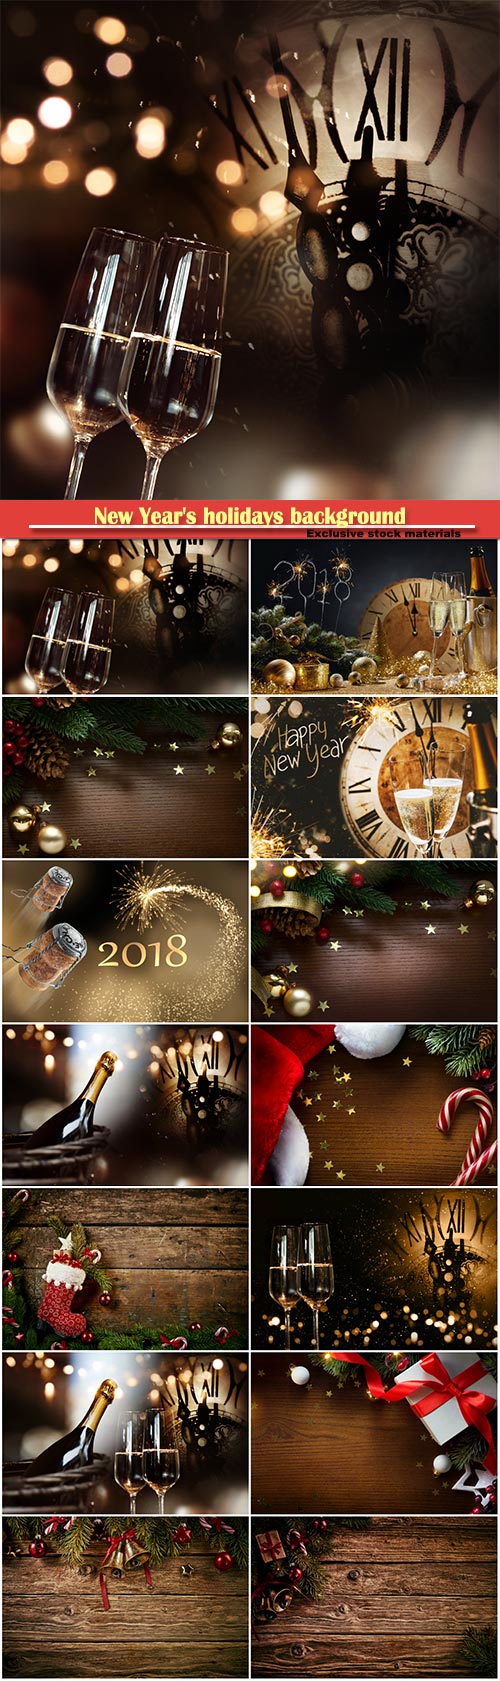 New Year's holidays background with champagne and clock for new year